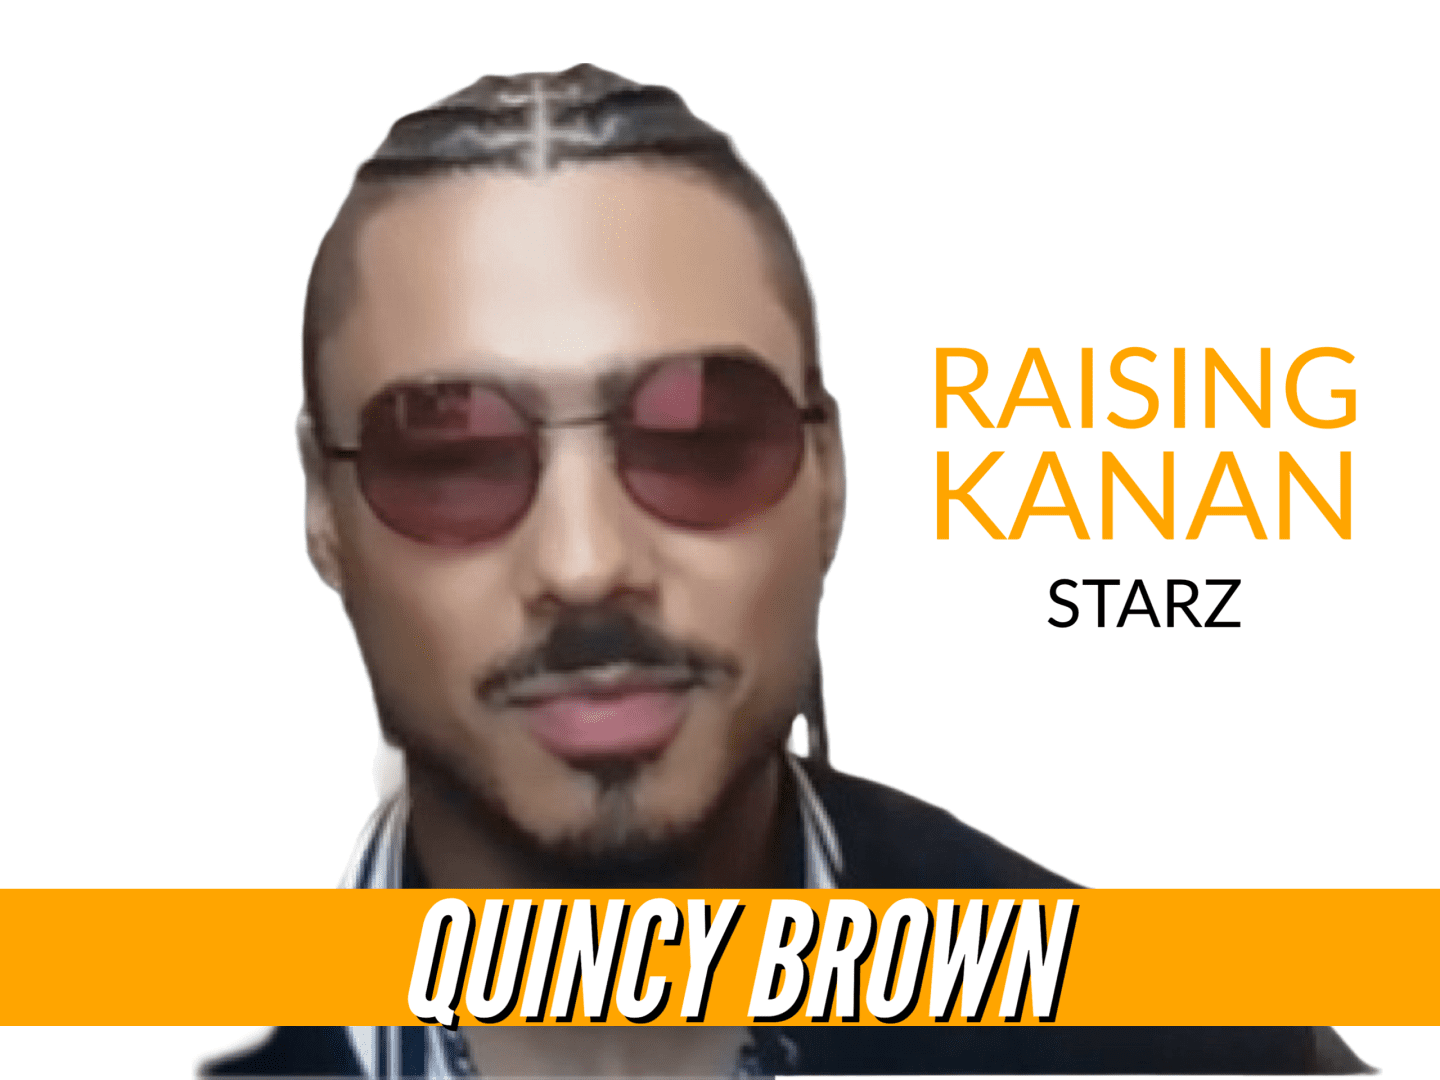 Quincy Brown mixed a little Al B. Sure! and Diddy for 'Raising Kanan' character